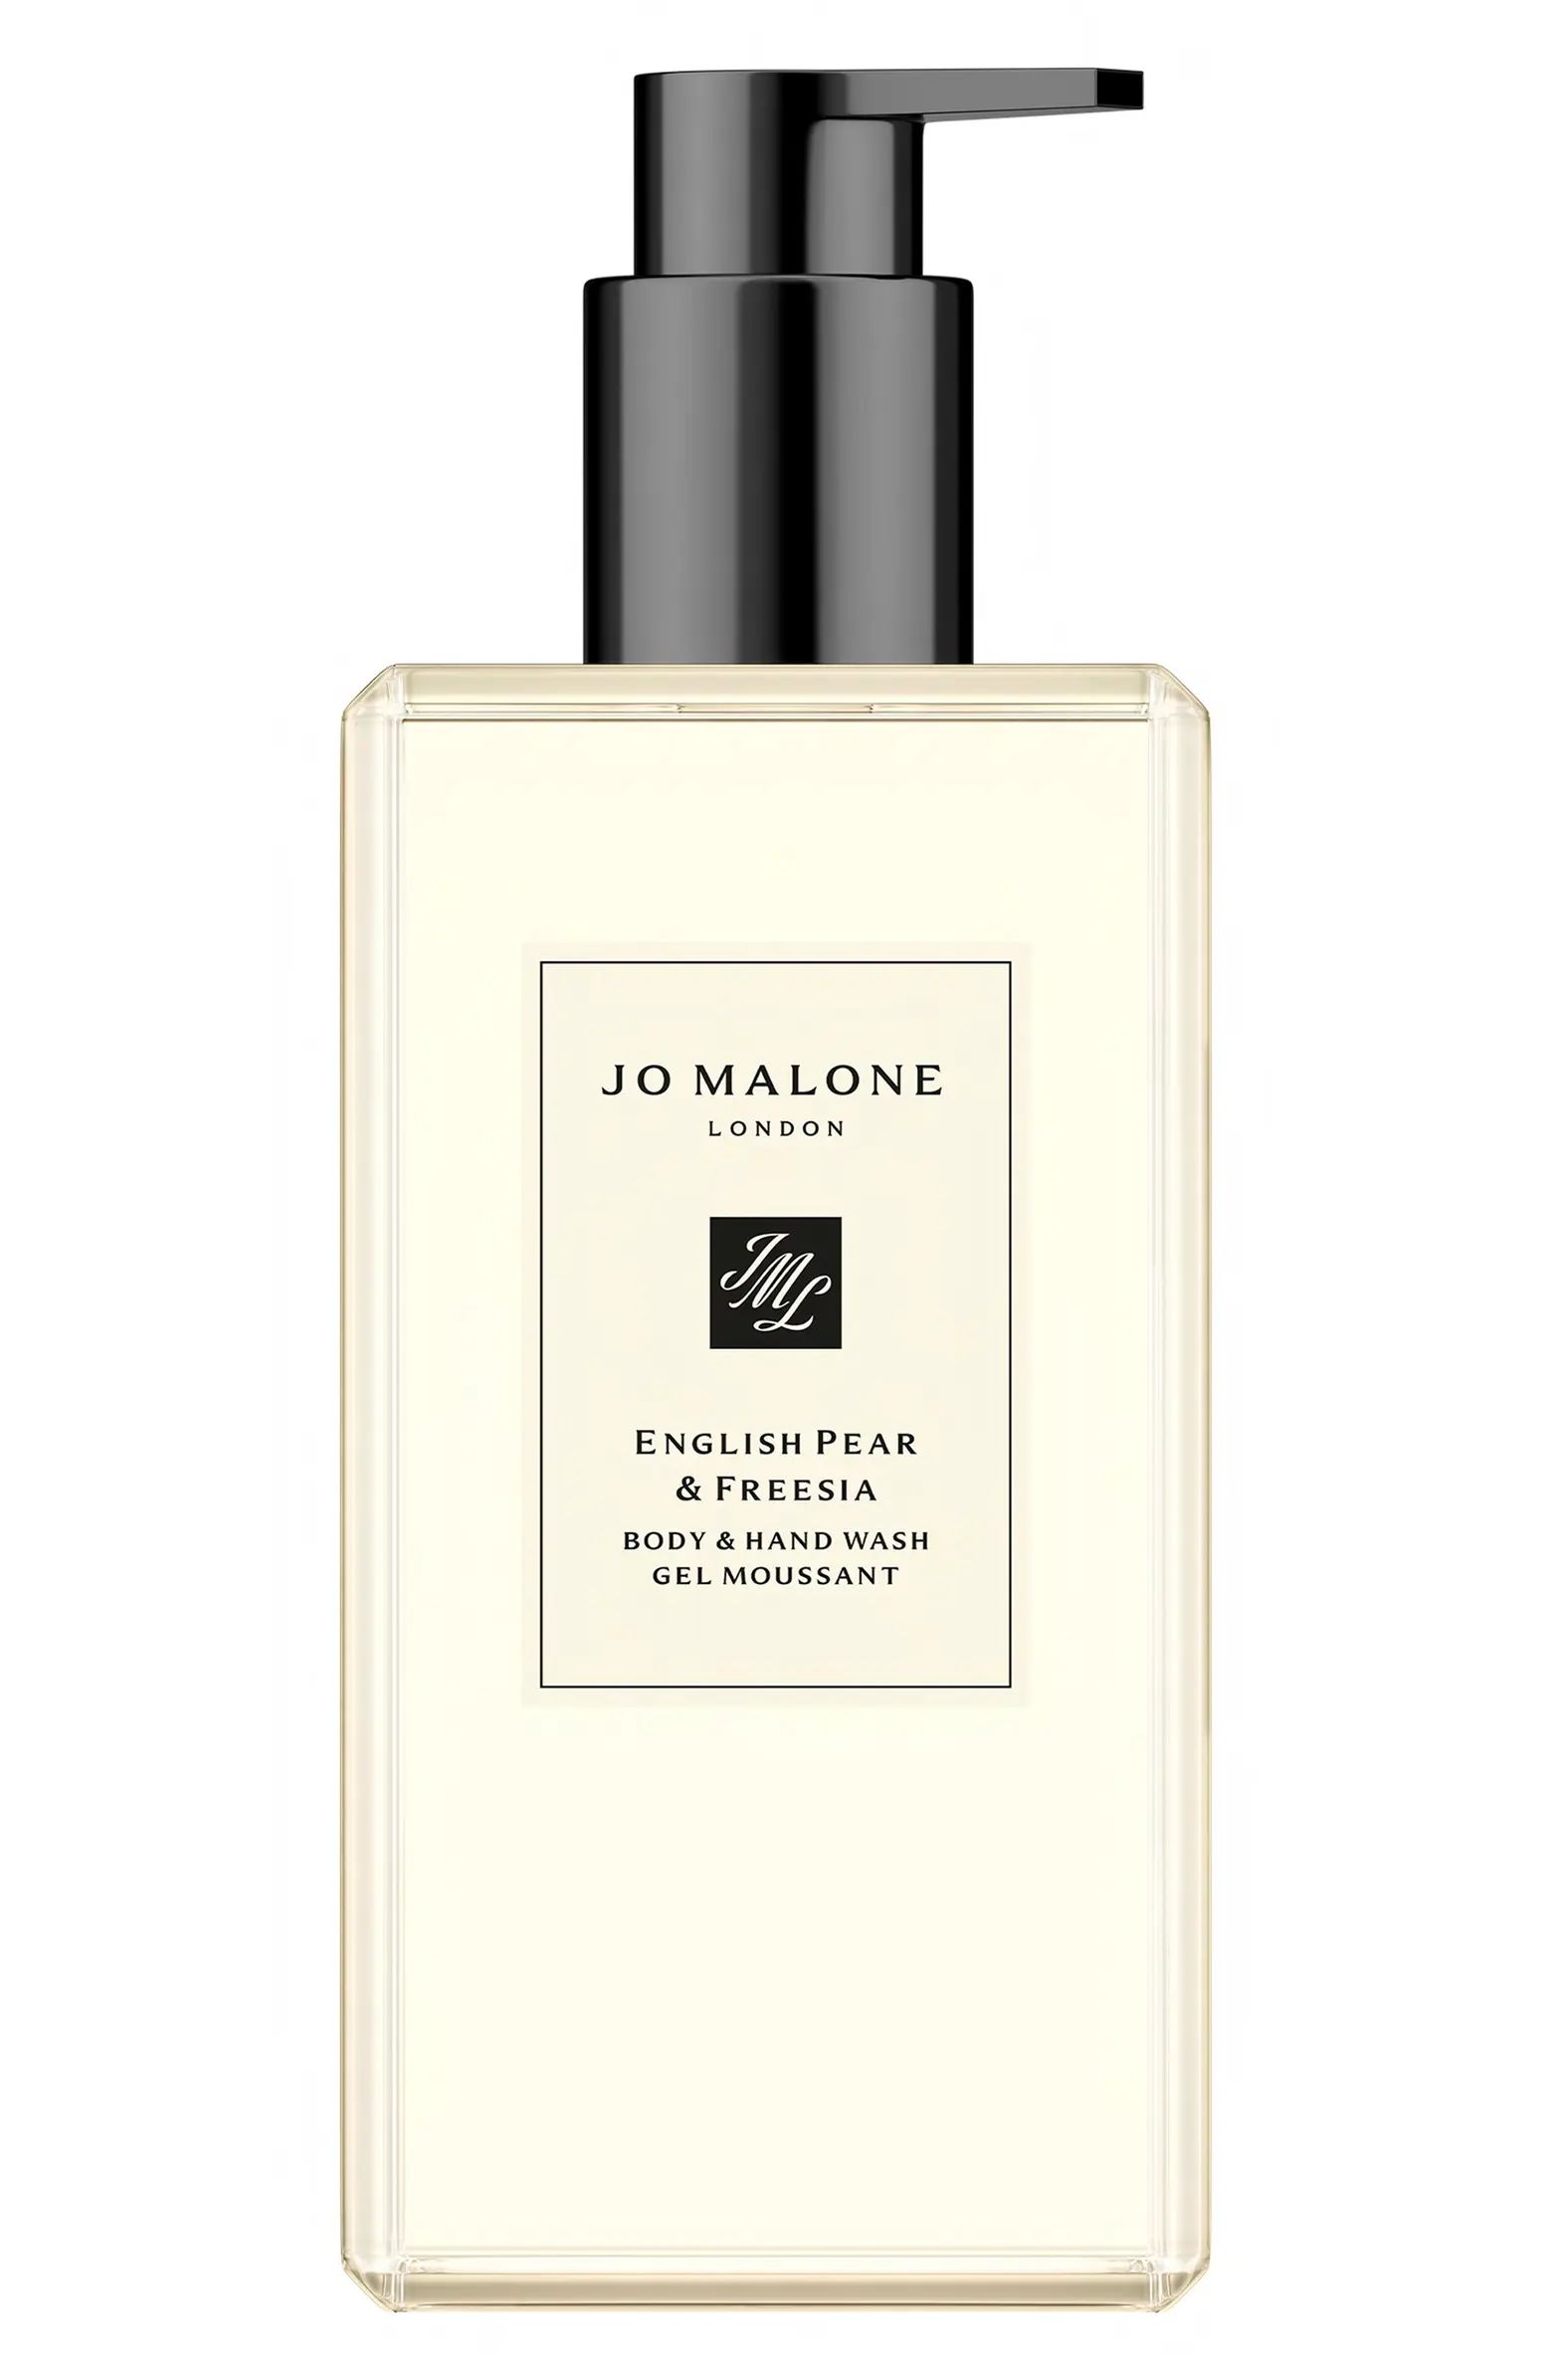 English Pear & Freesia Body & Hand Wash $76 Value | Nordstrom